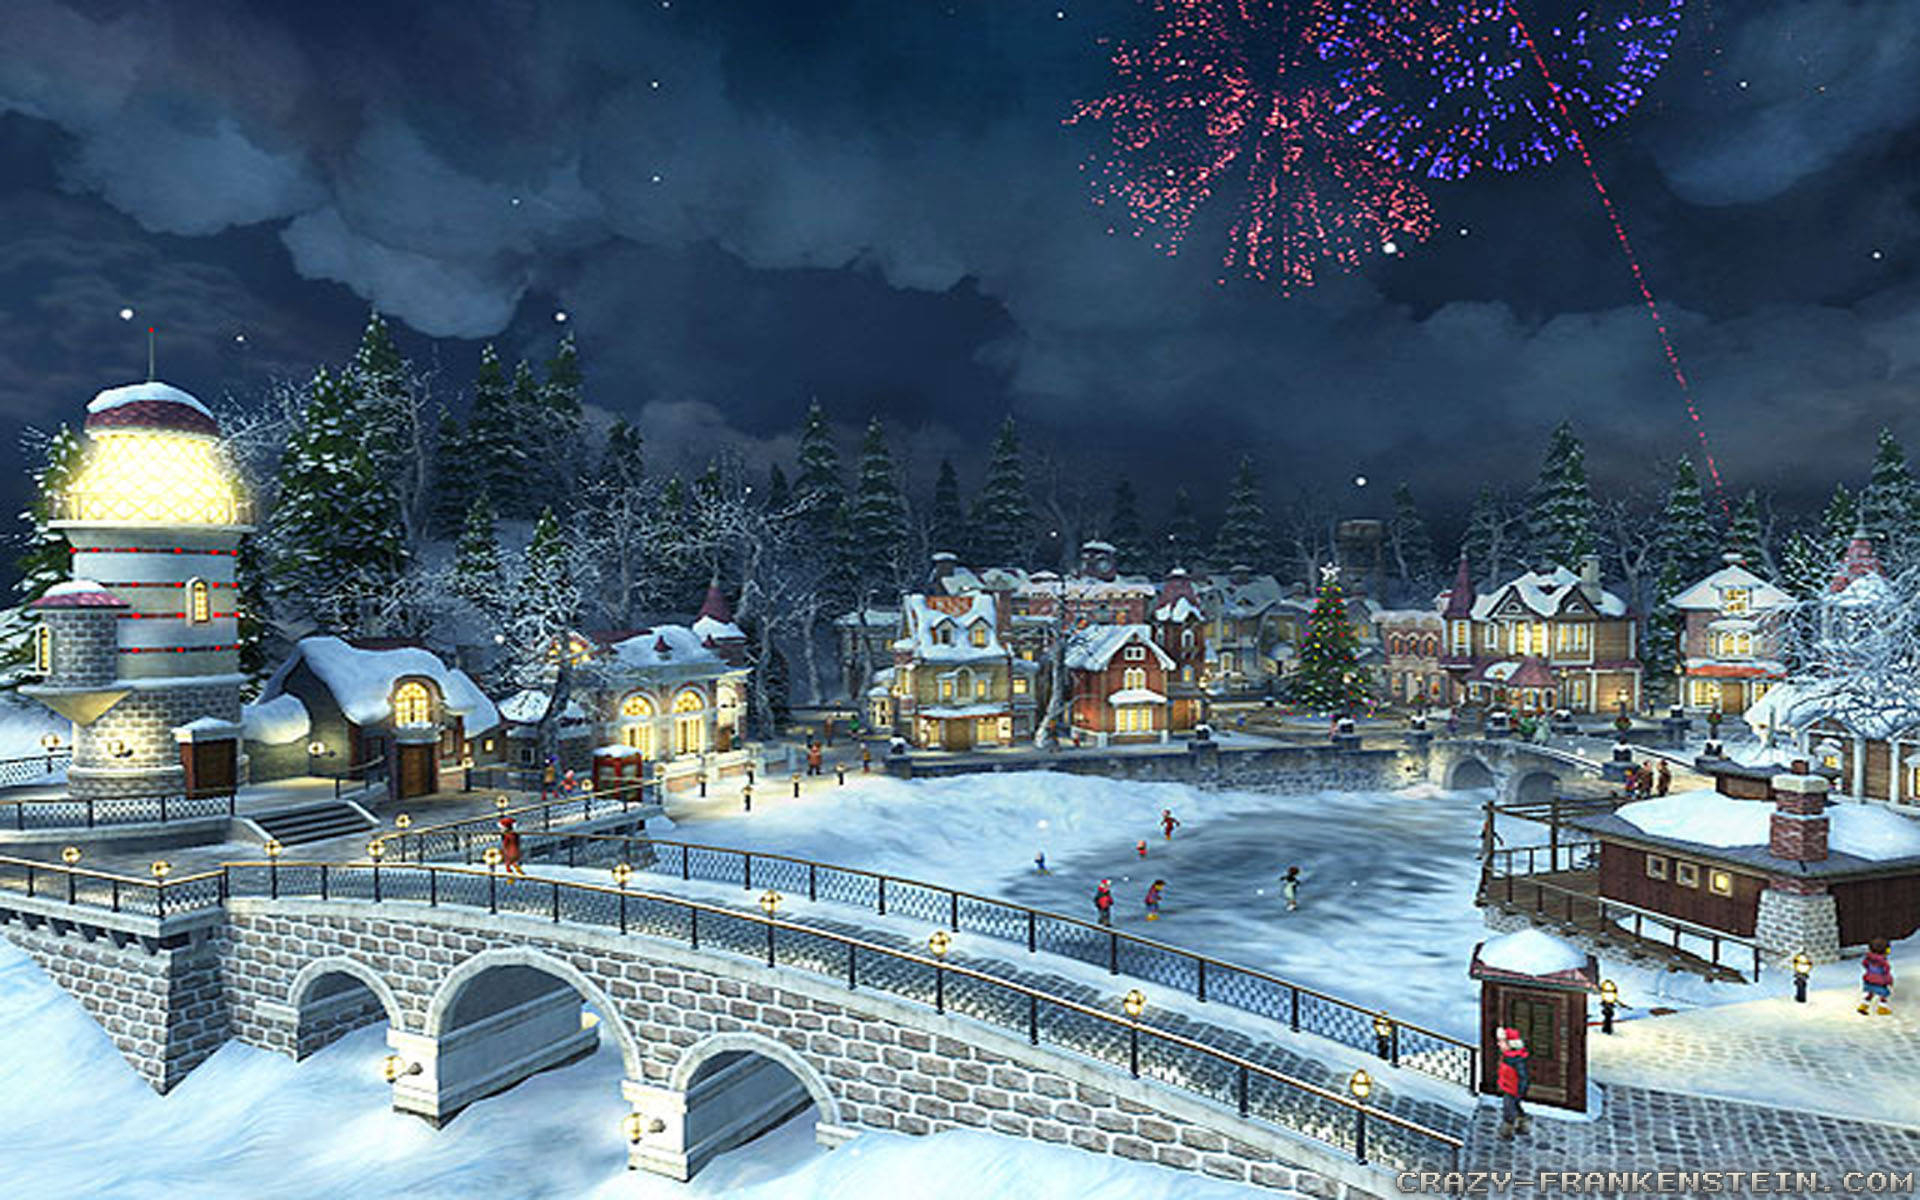 Spend a snowy Christmas in the city Wallpaper